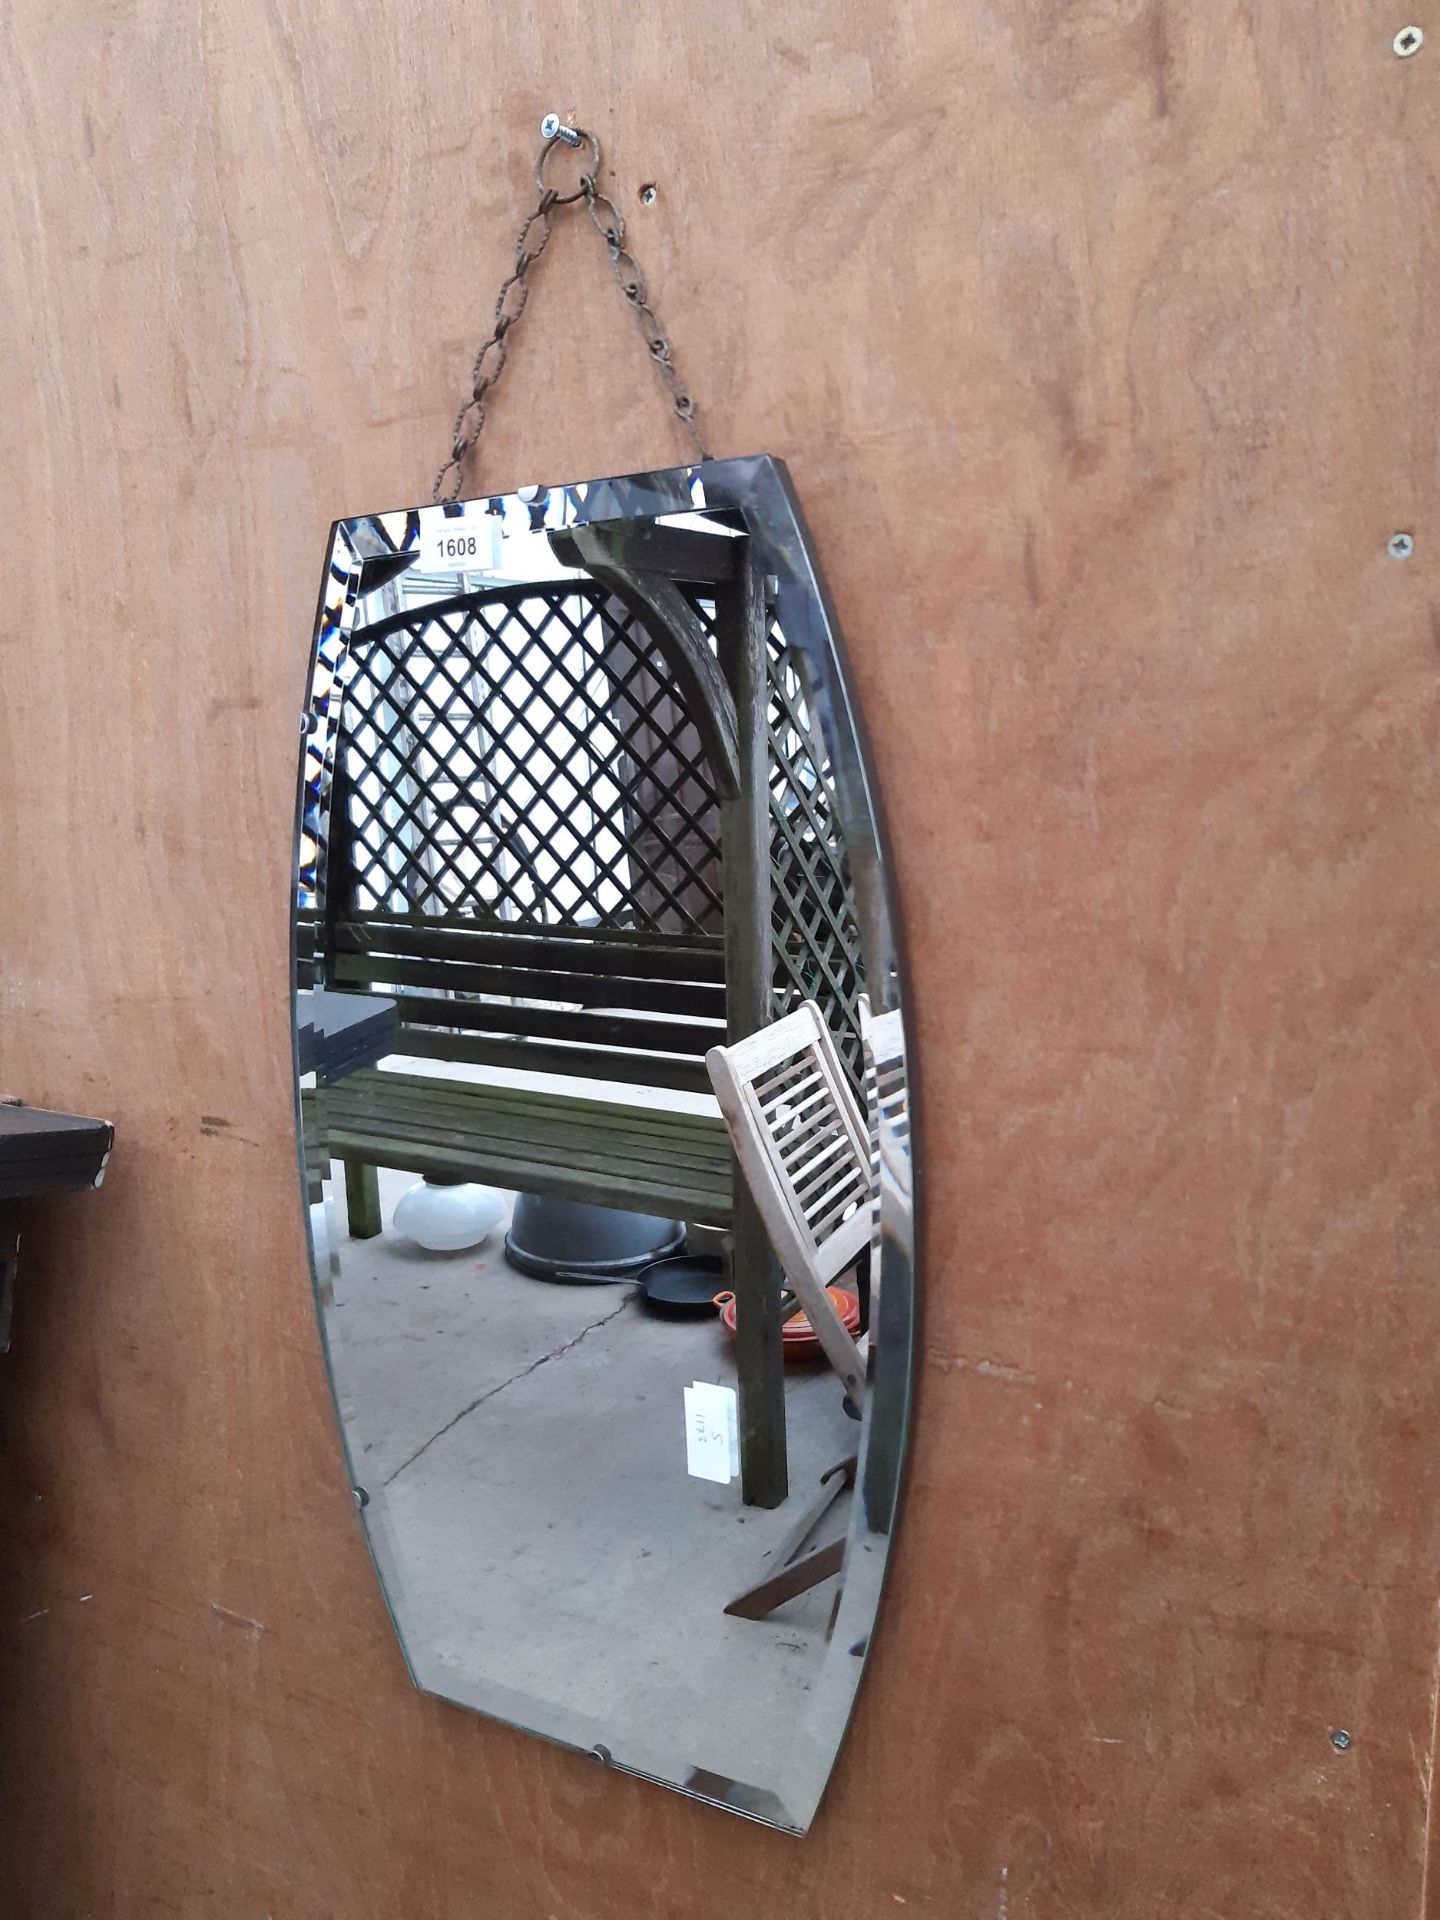 A CURVED ART DECO STYLE UNFRAMED BEVELED EDGE WALL MIRROR WITH HANGING CHAIN